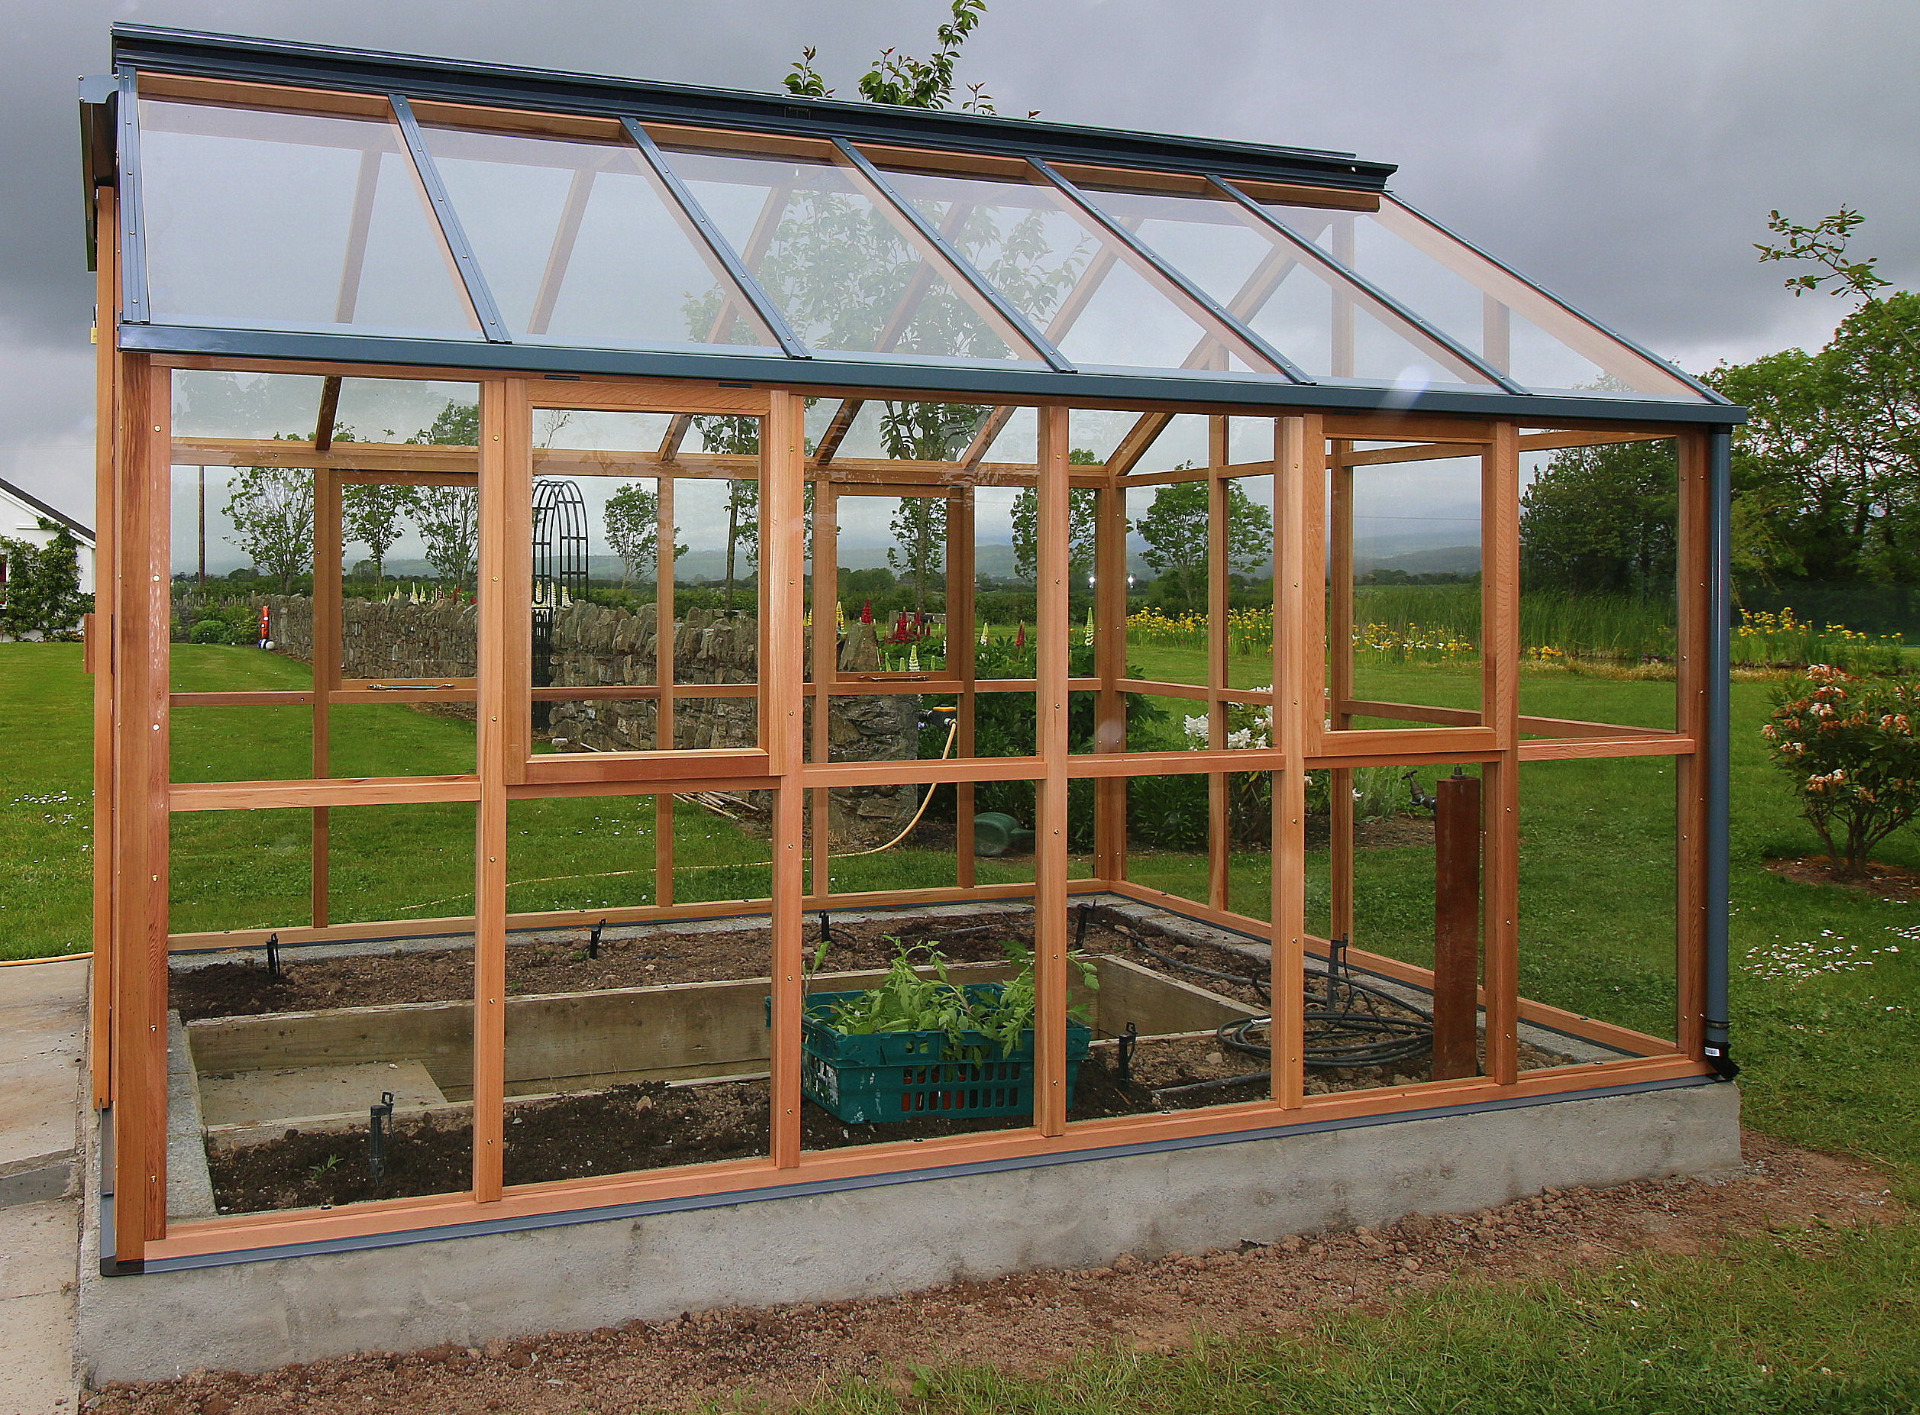 Gabriel Ash Classic Eight (8x12) Greenhouse in Kilkenny | the only timber greenhouses endorsed by the RHS | Owen Chubb  087-2306128